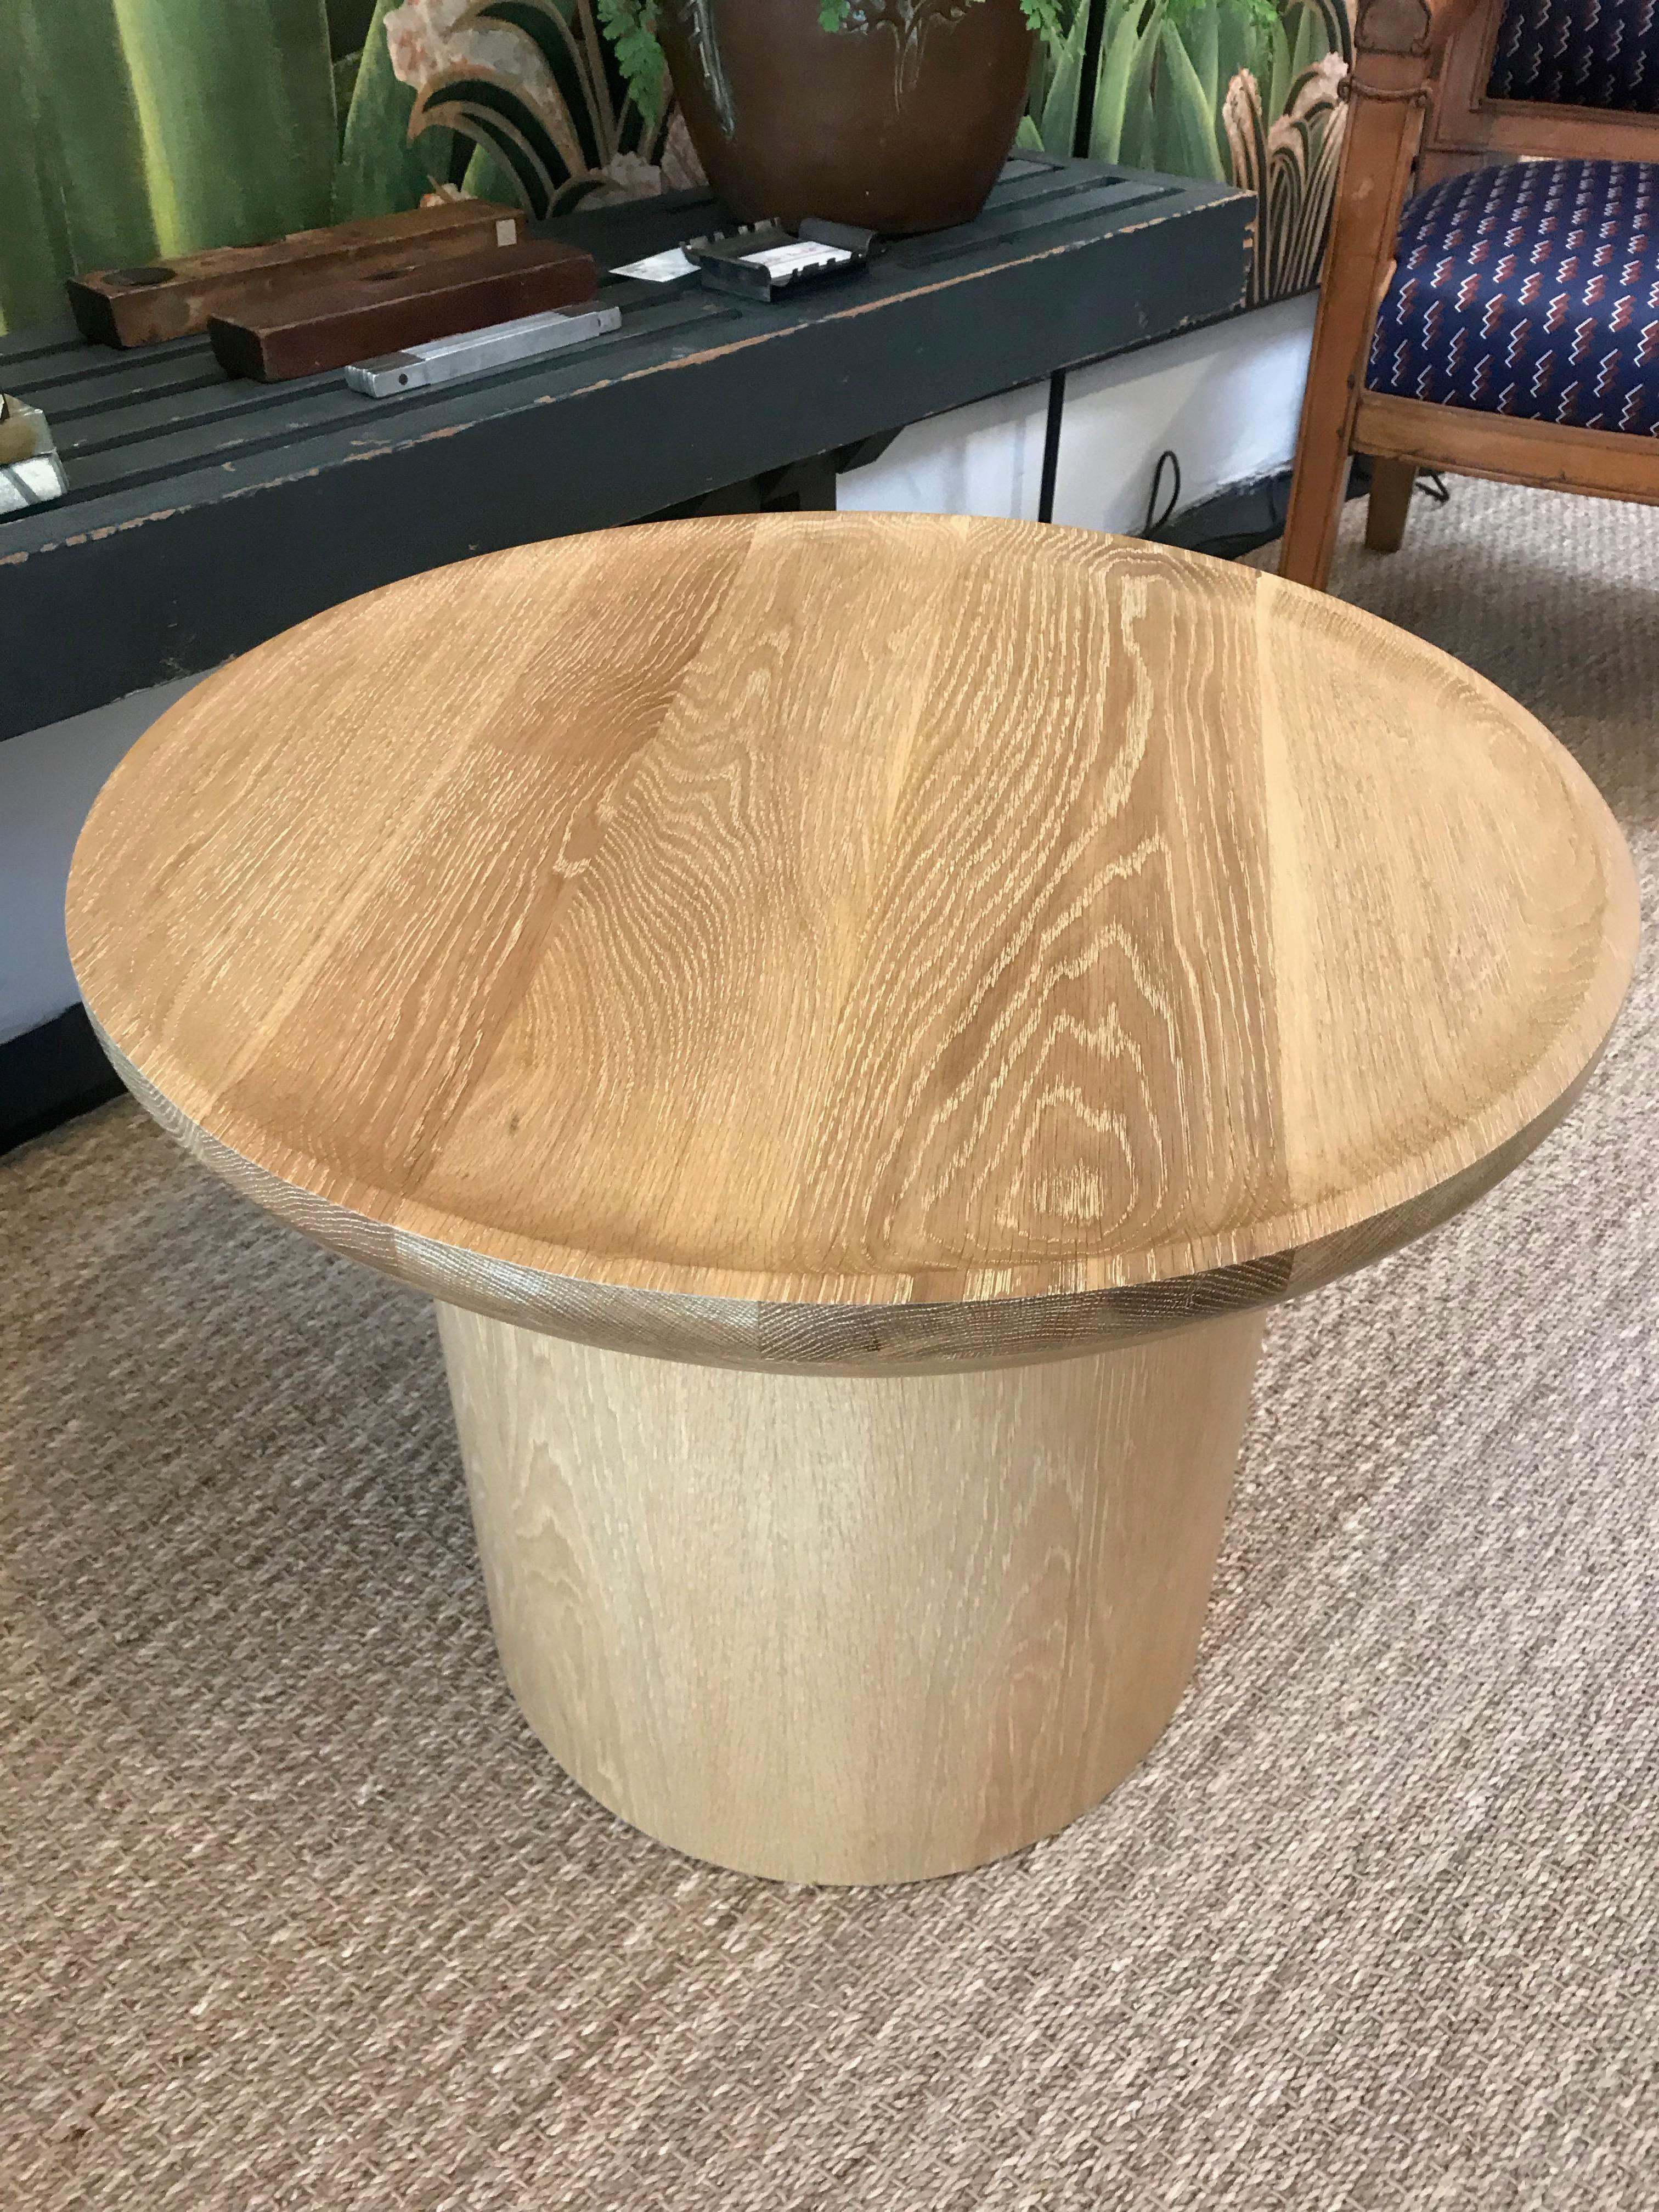 Martin & Brockett's Findley Round Low Side Table features our Findley Collection’s signature carved, curved lip and a round pedestal base. Shown in Cerused Oak finish

Standard: H 19.75 in. x W 24 in.

Part of our Findley Collection.

Available for